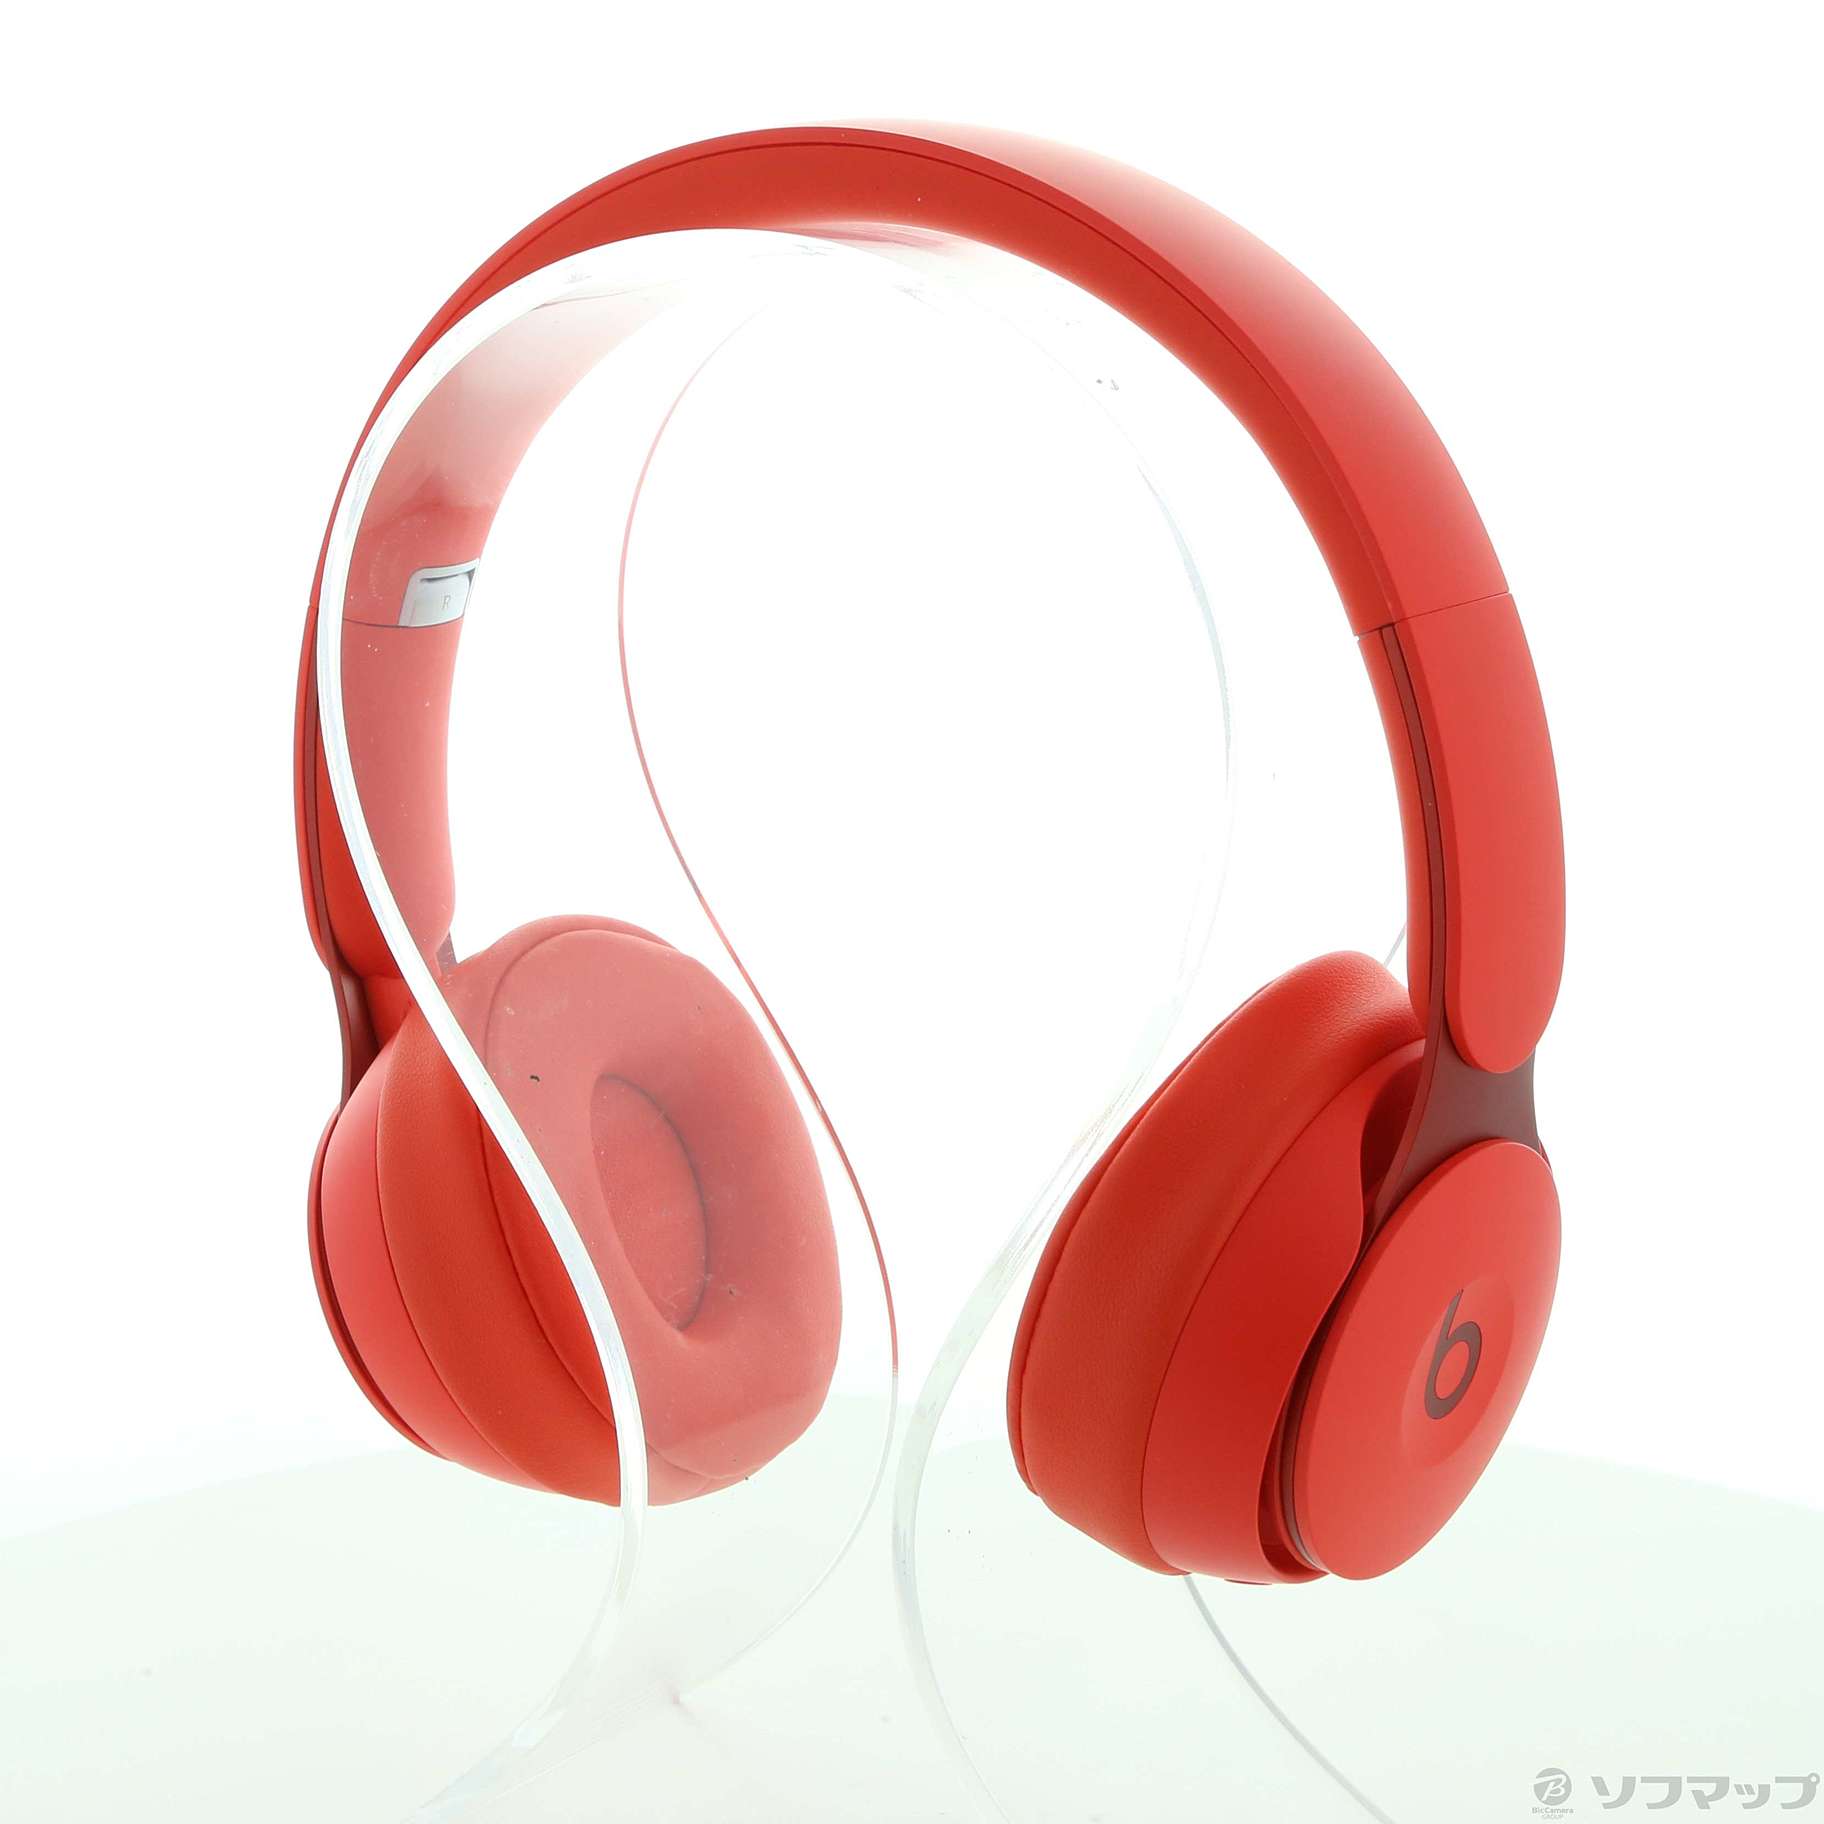 Beats Solo Pro More Matte Collection MRJC2FE／A レッド ◇01/11(火)値下げ！